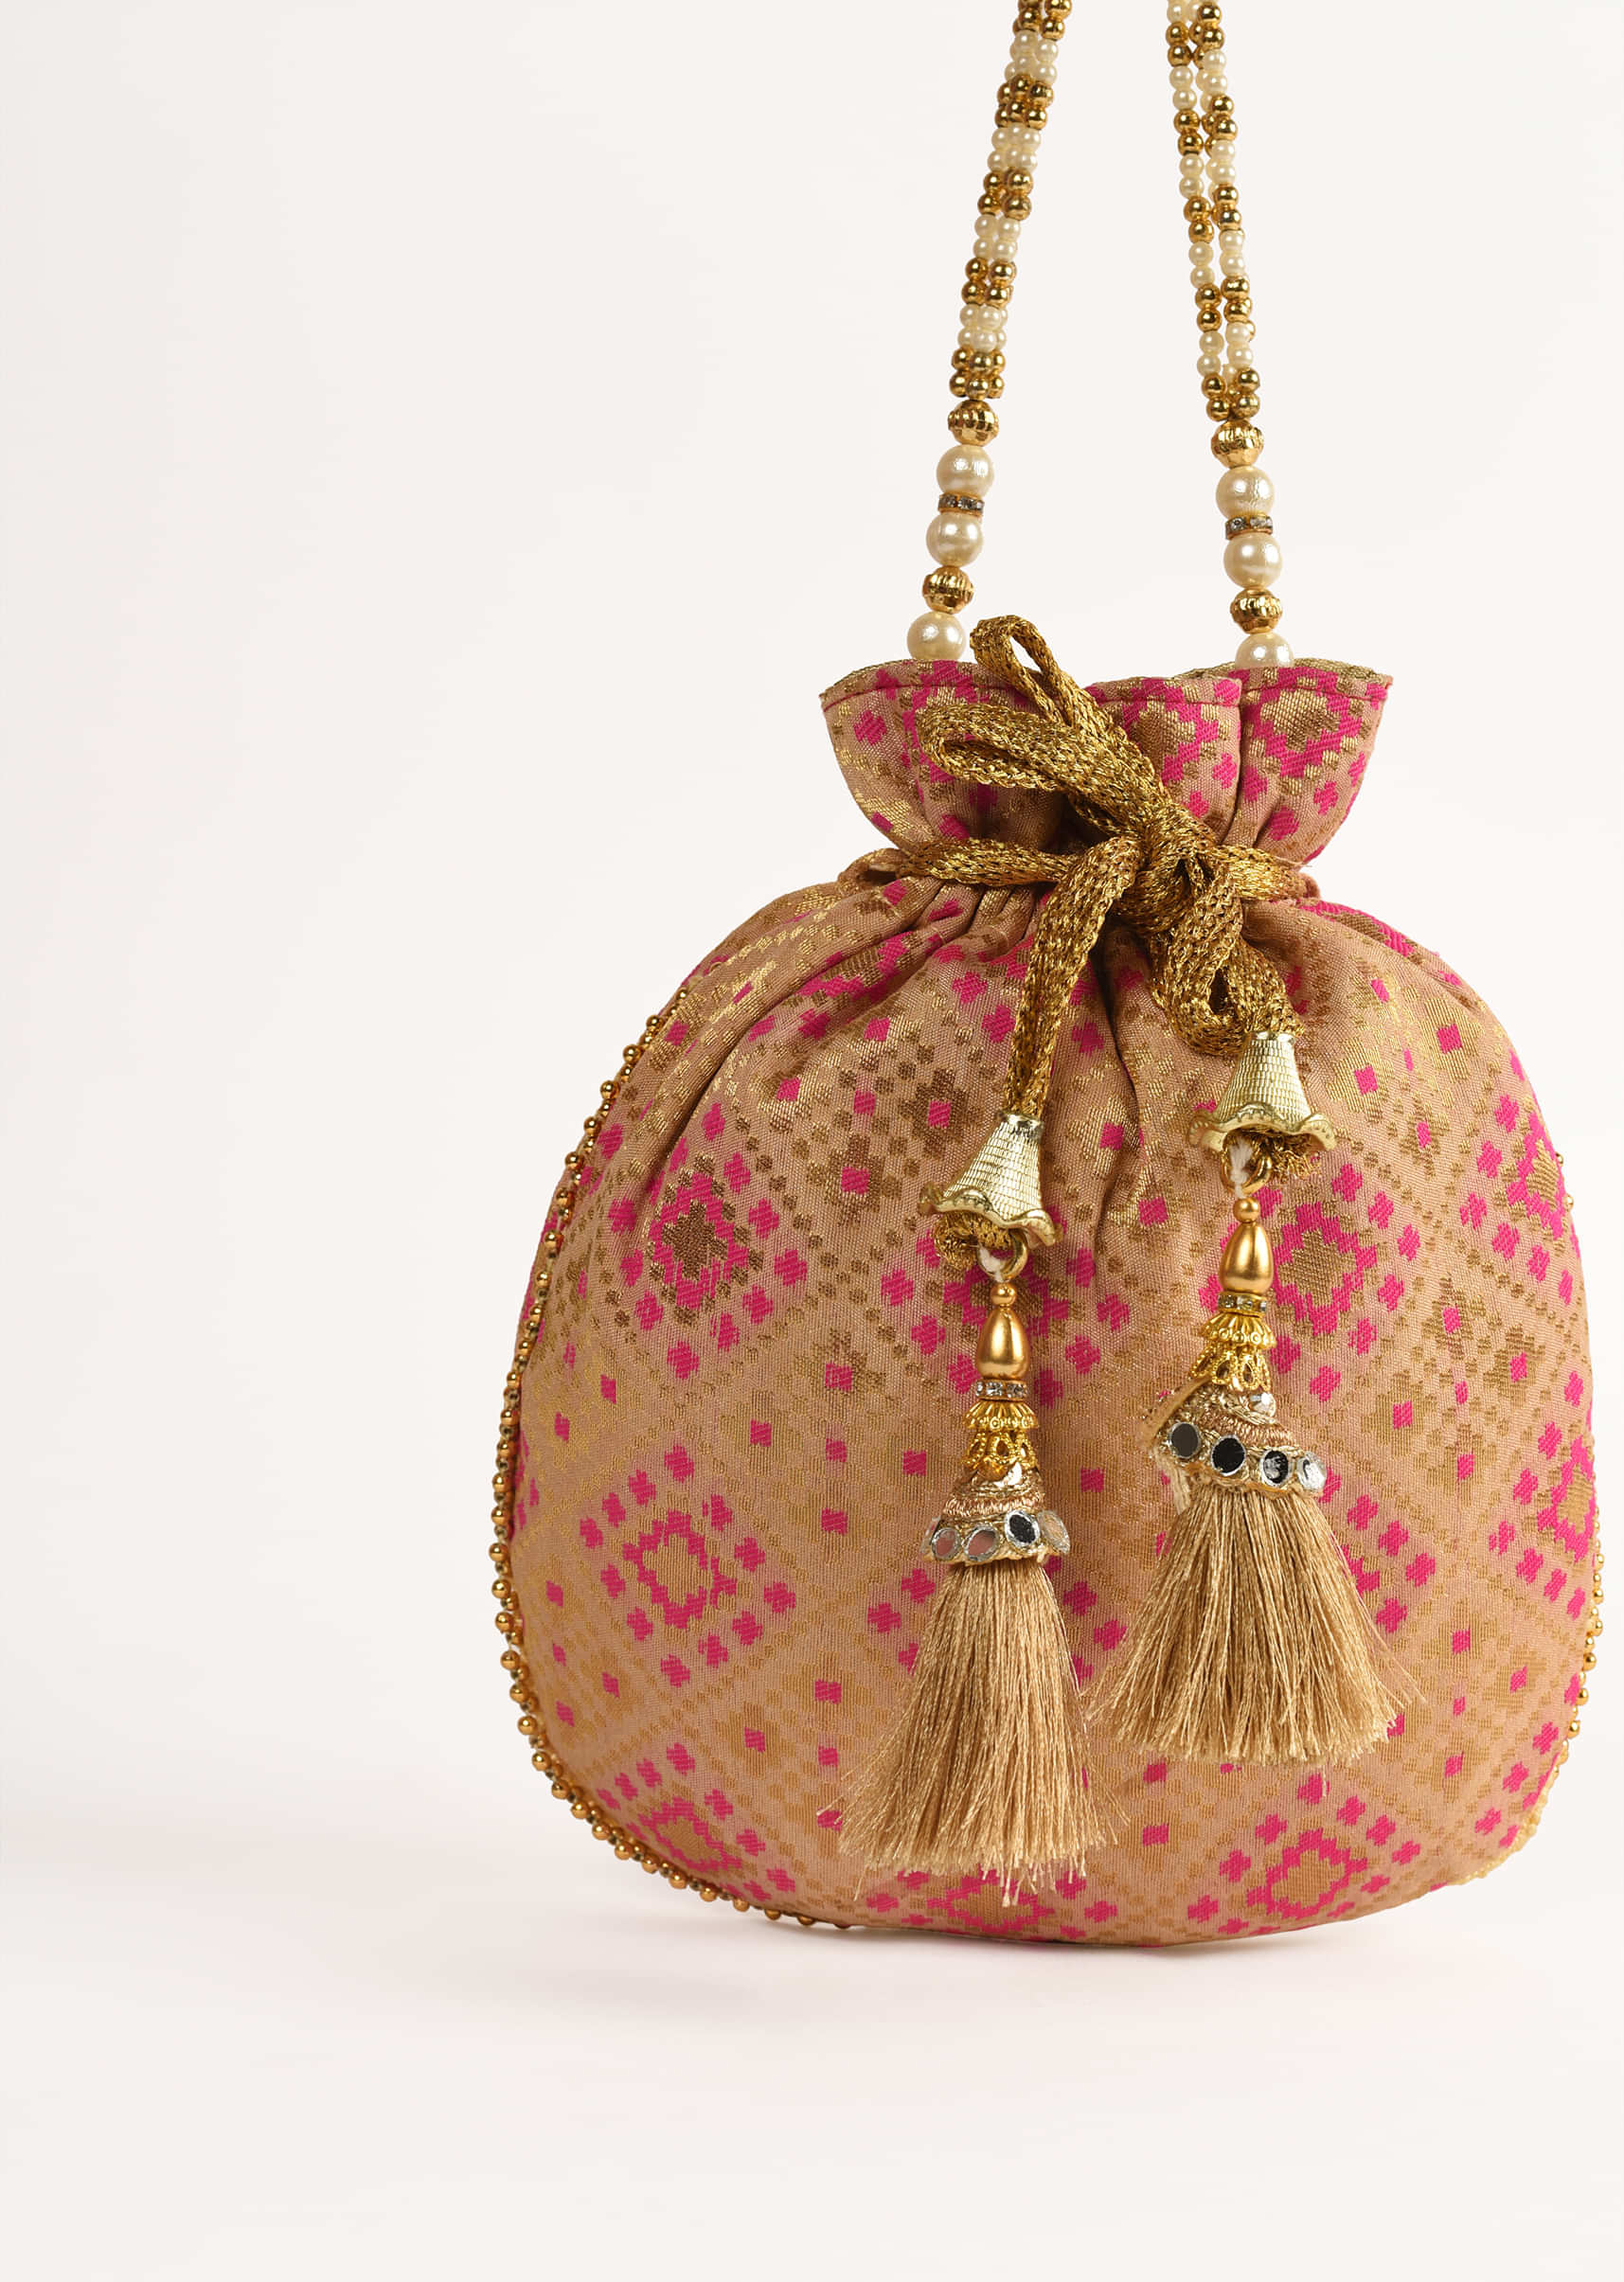 Buy Potli Bags from top Brands at Best Prices Online in India  Tata CLiQ